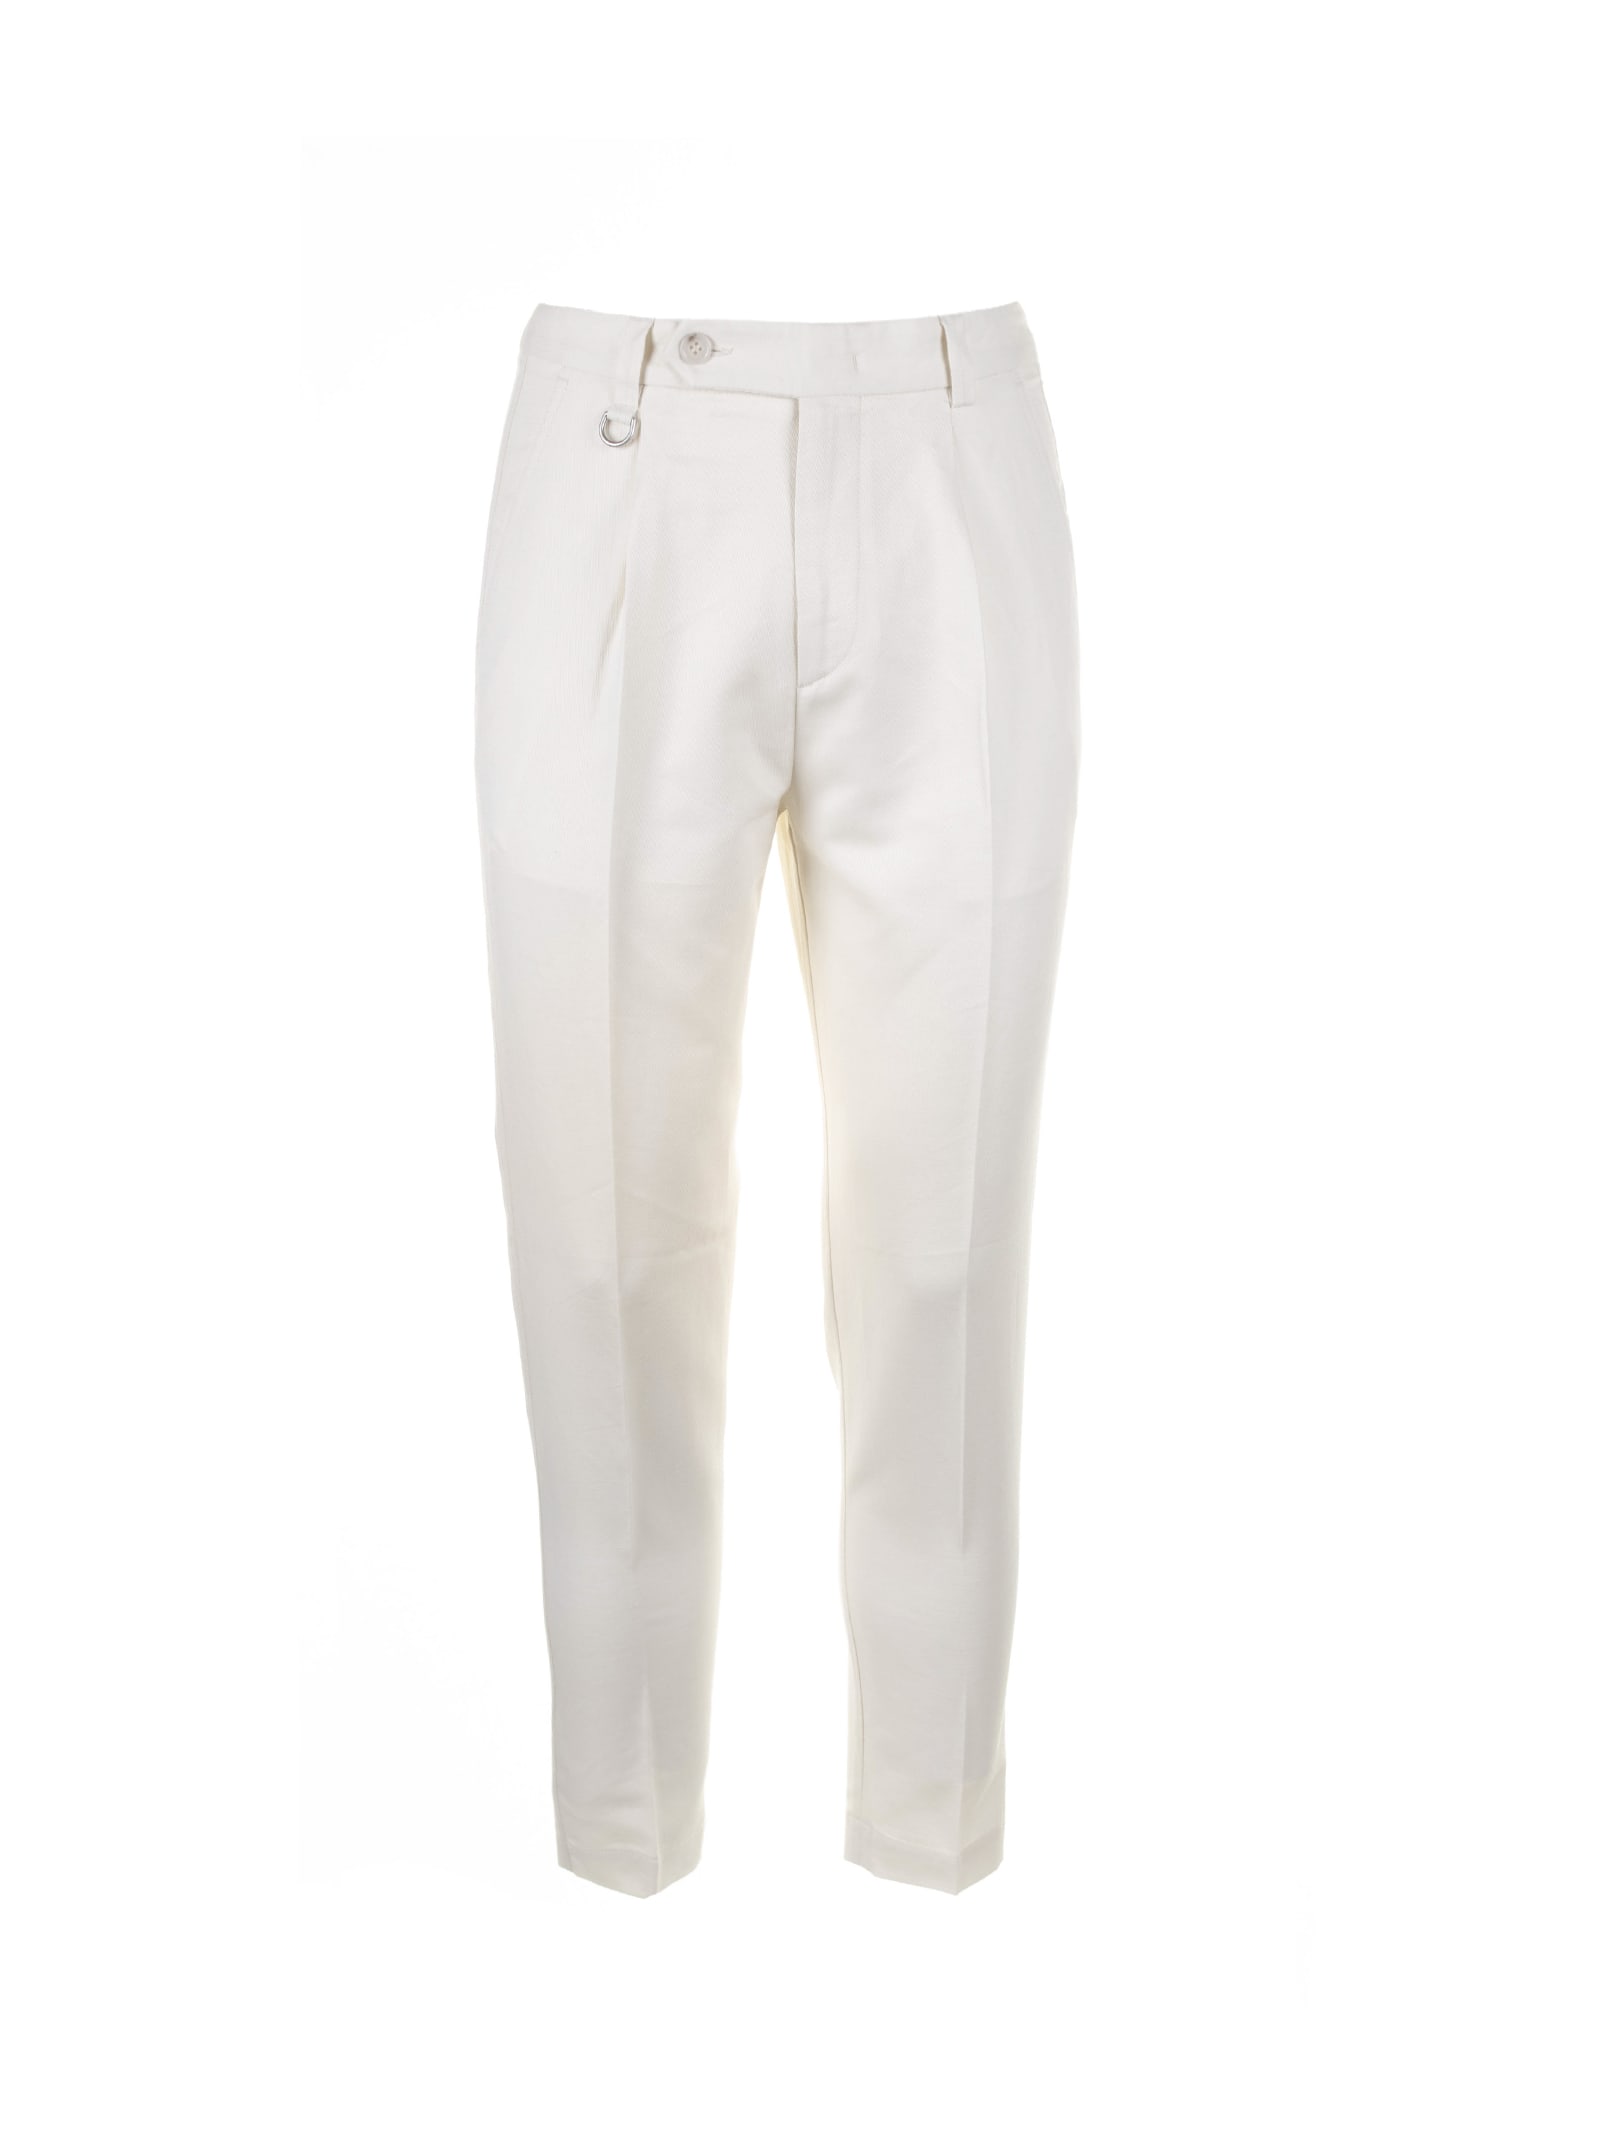 White Cotton And Linen Trousers